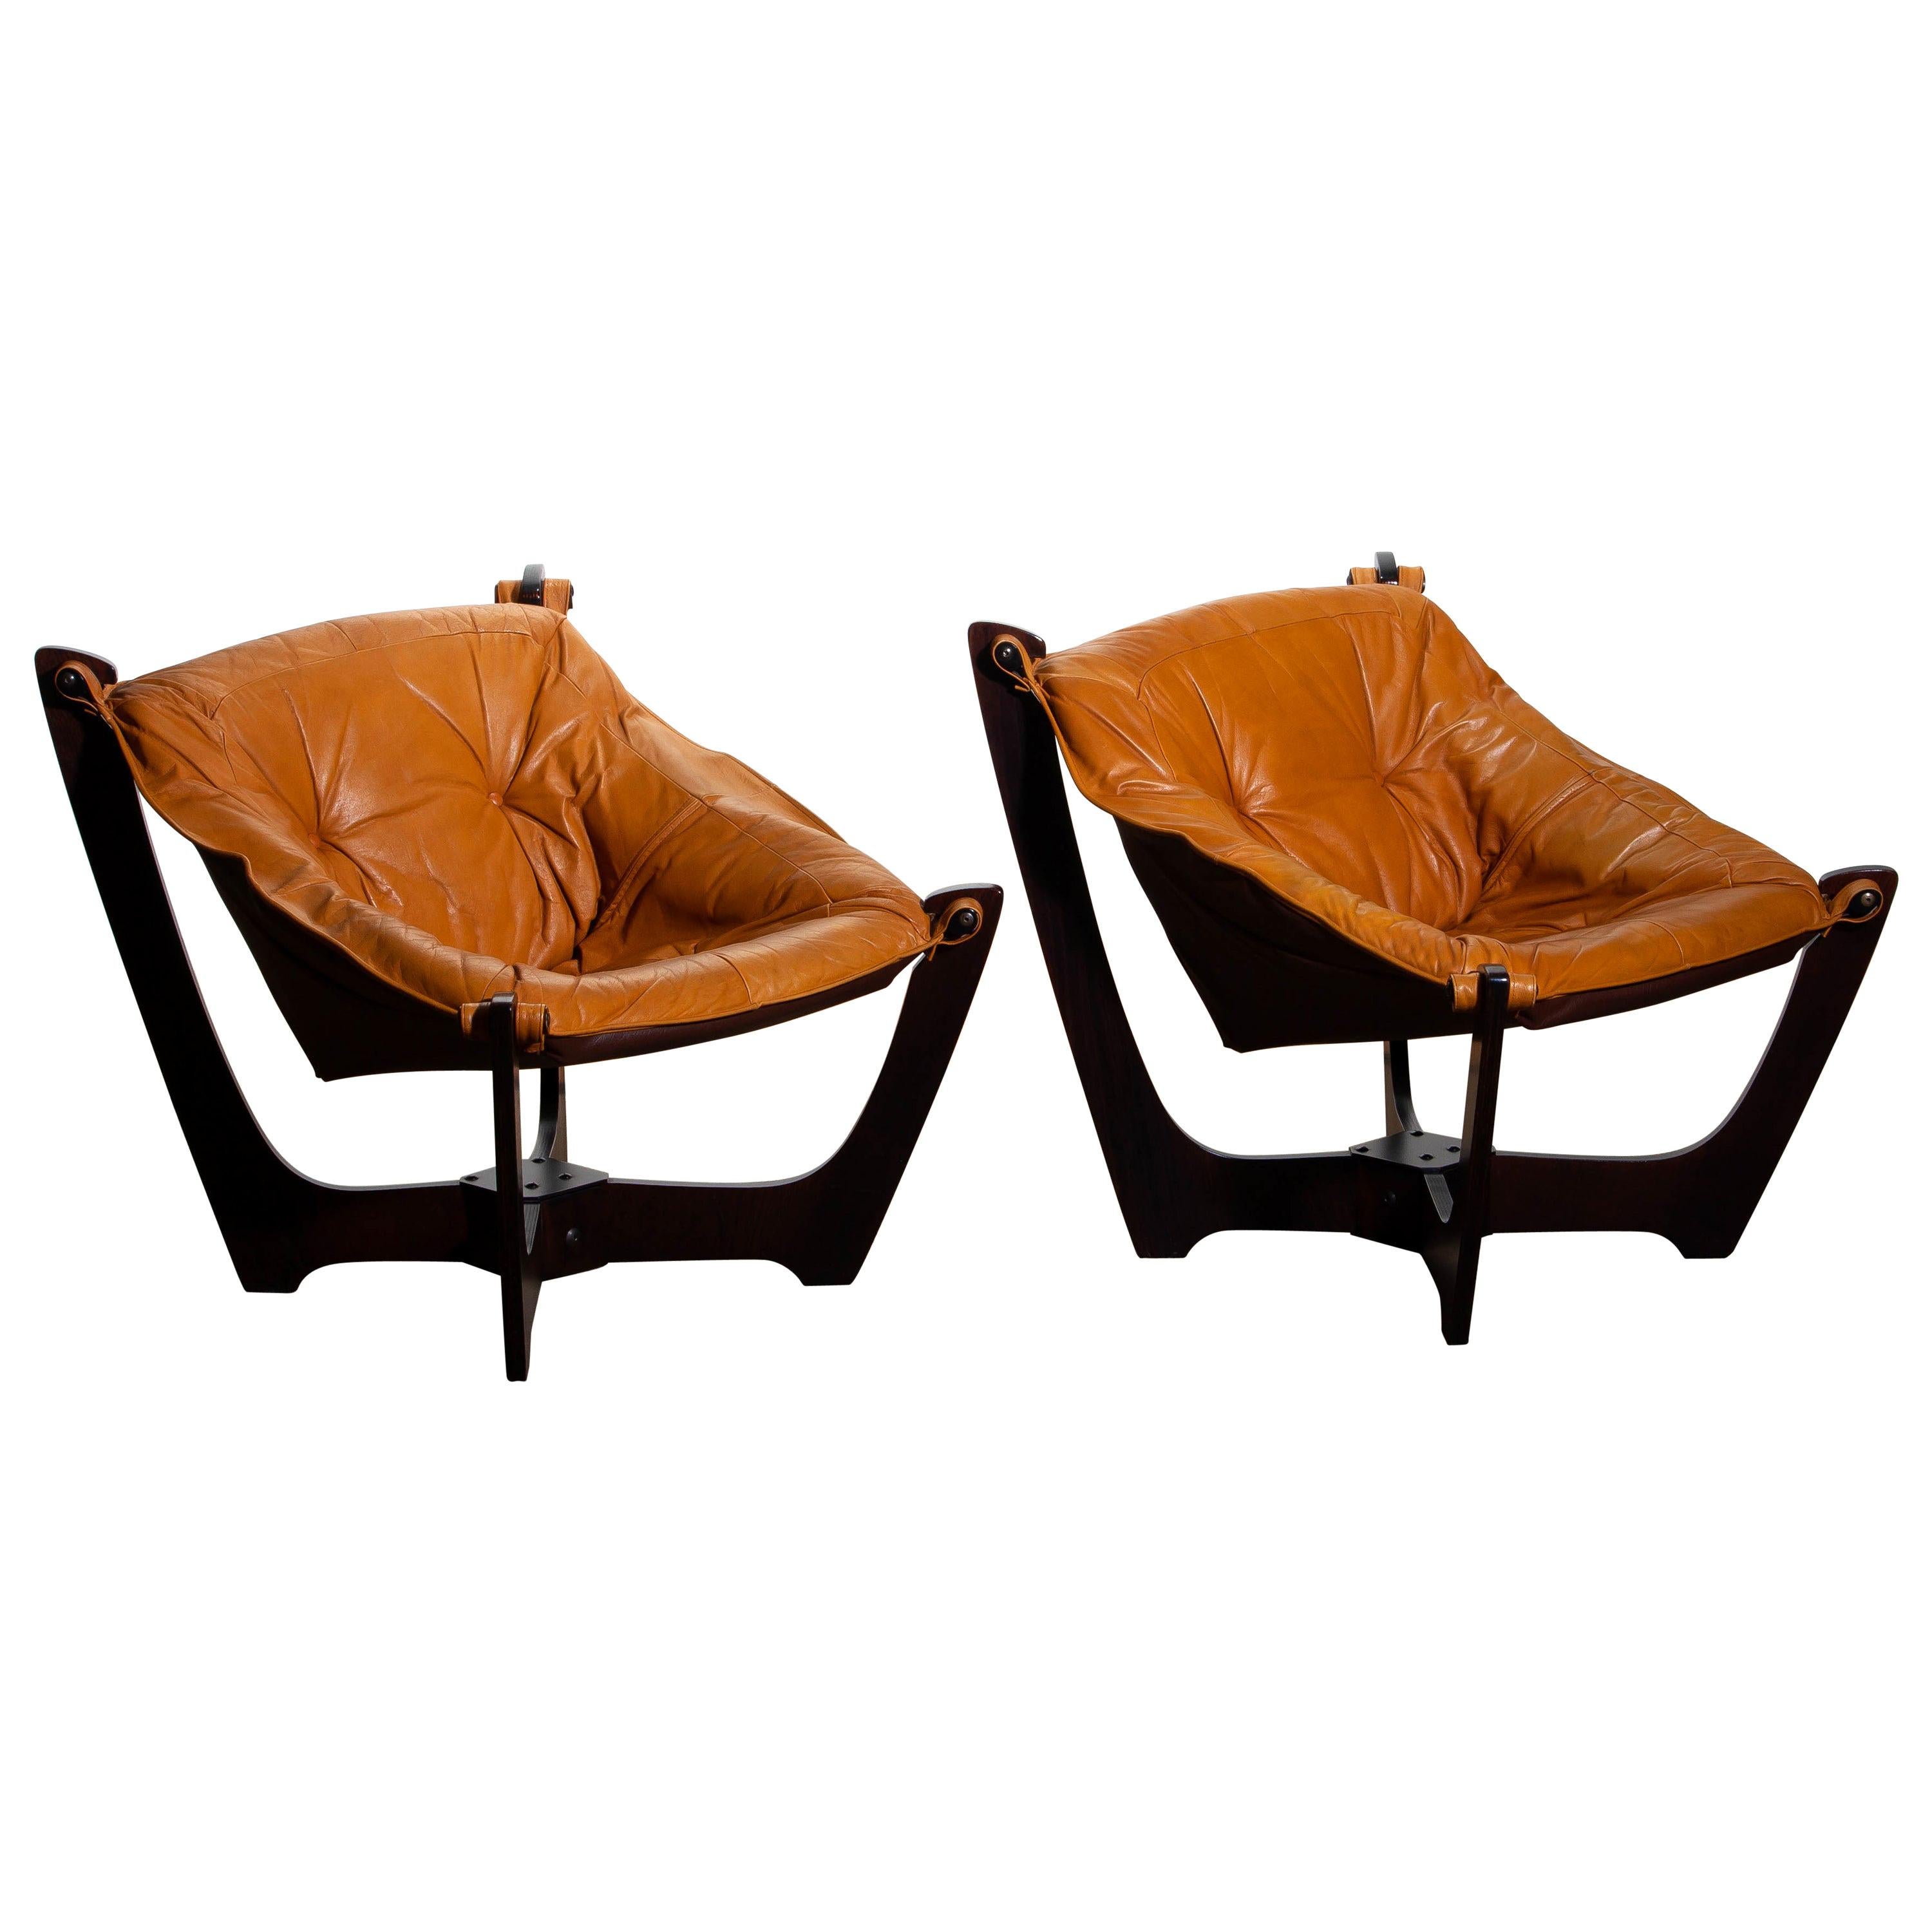 Mid-Century Modern 1970 Pair of Leather Lounge Chairs by Odd Knutsen for Hjellegjerde Møbler Norway